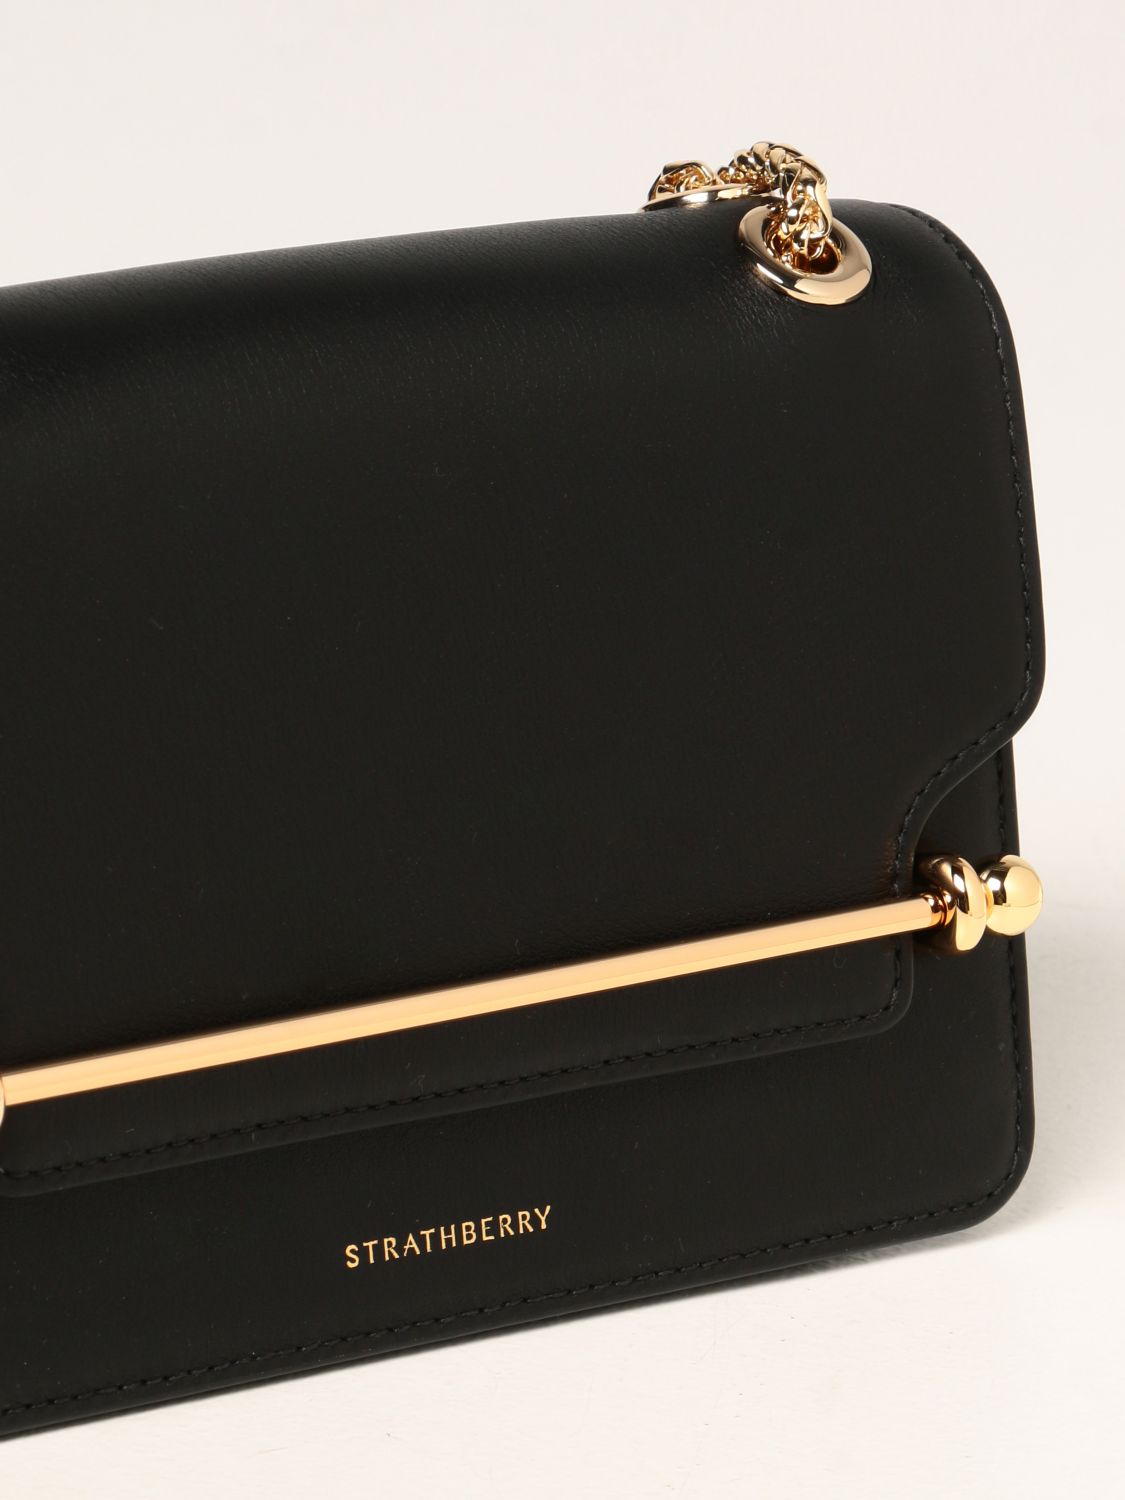 Strathberry, Bags, Strathberry East West Mini Bag Black